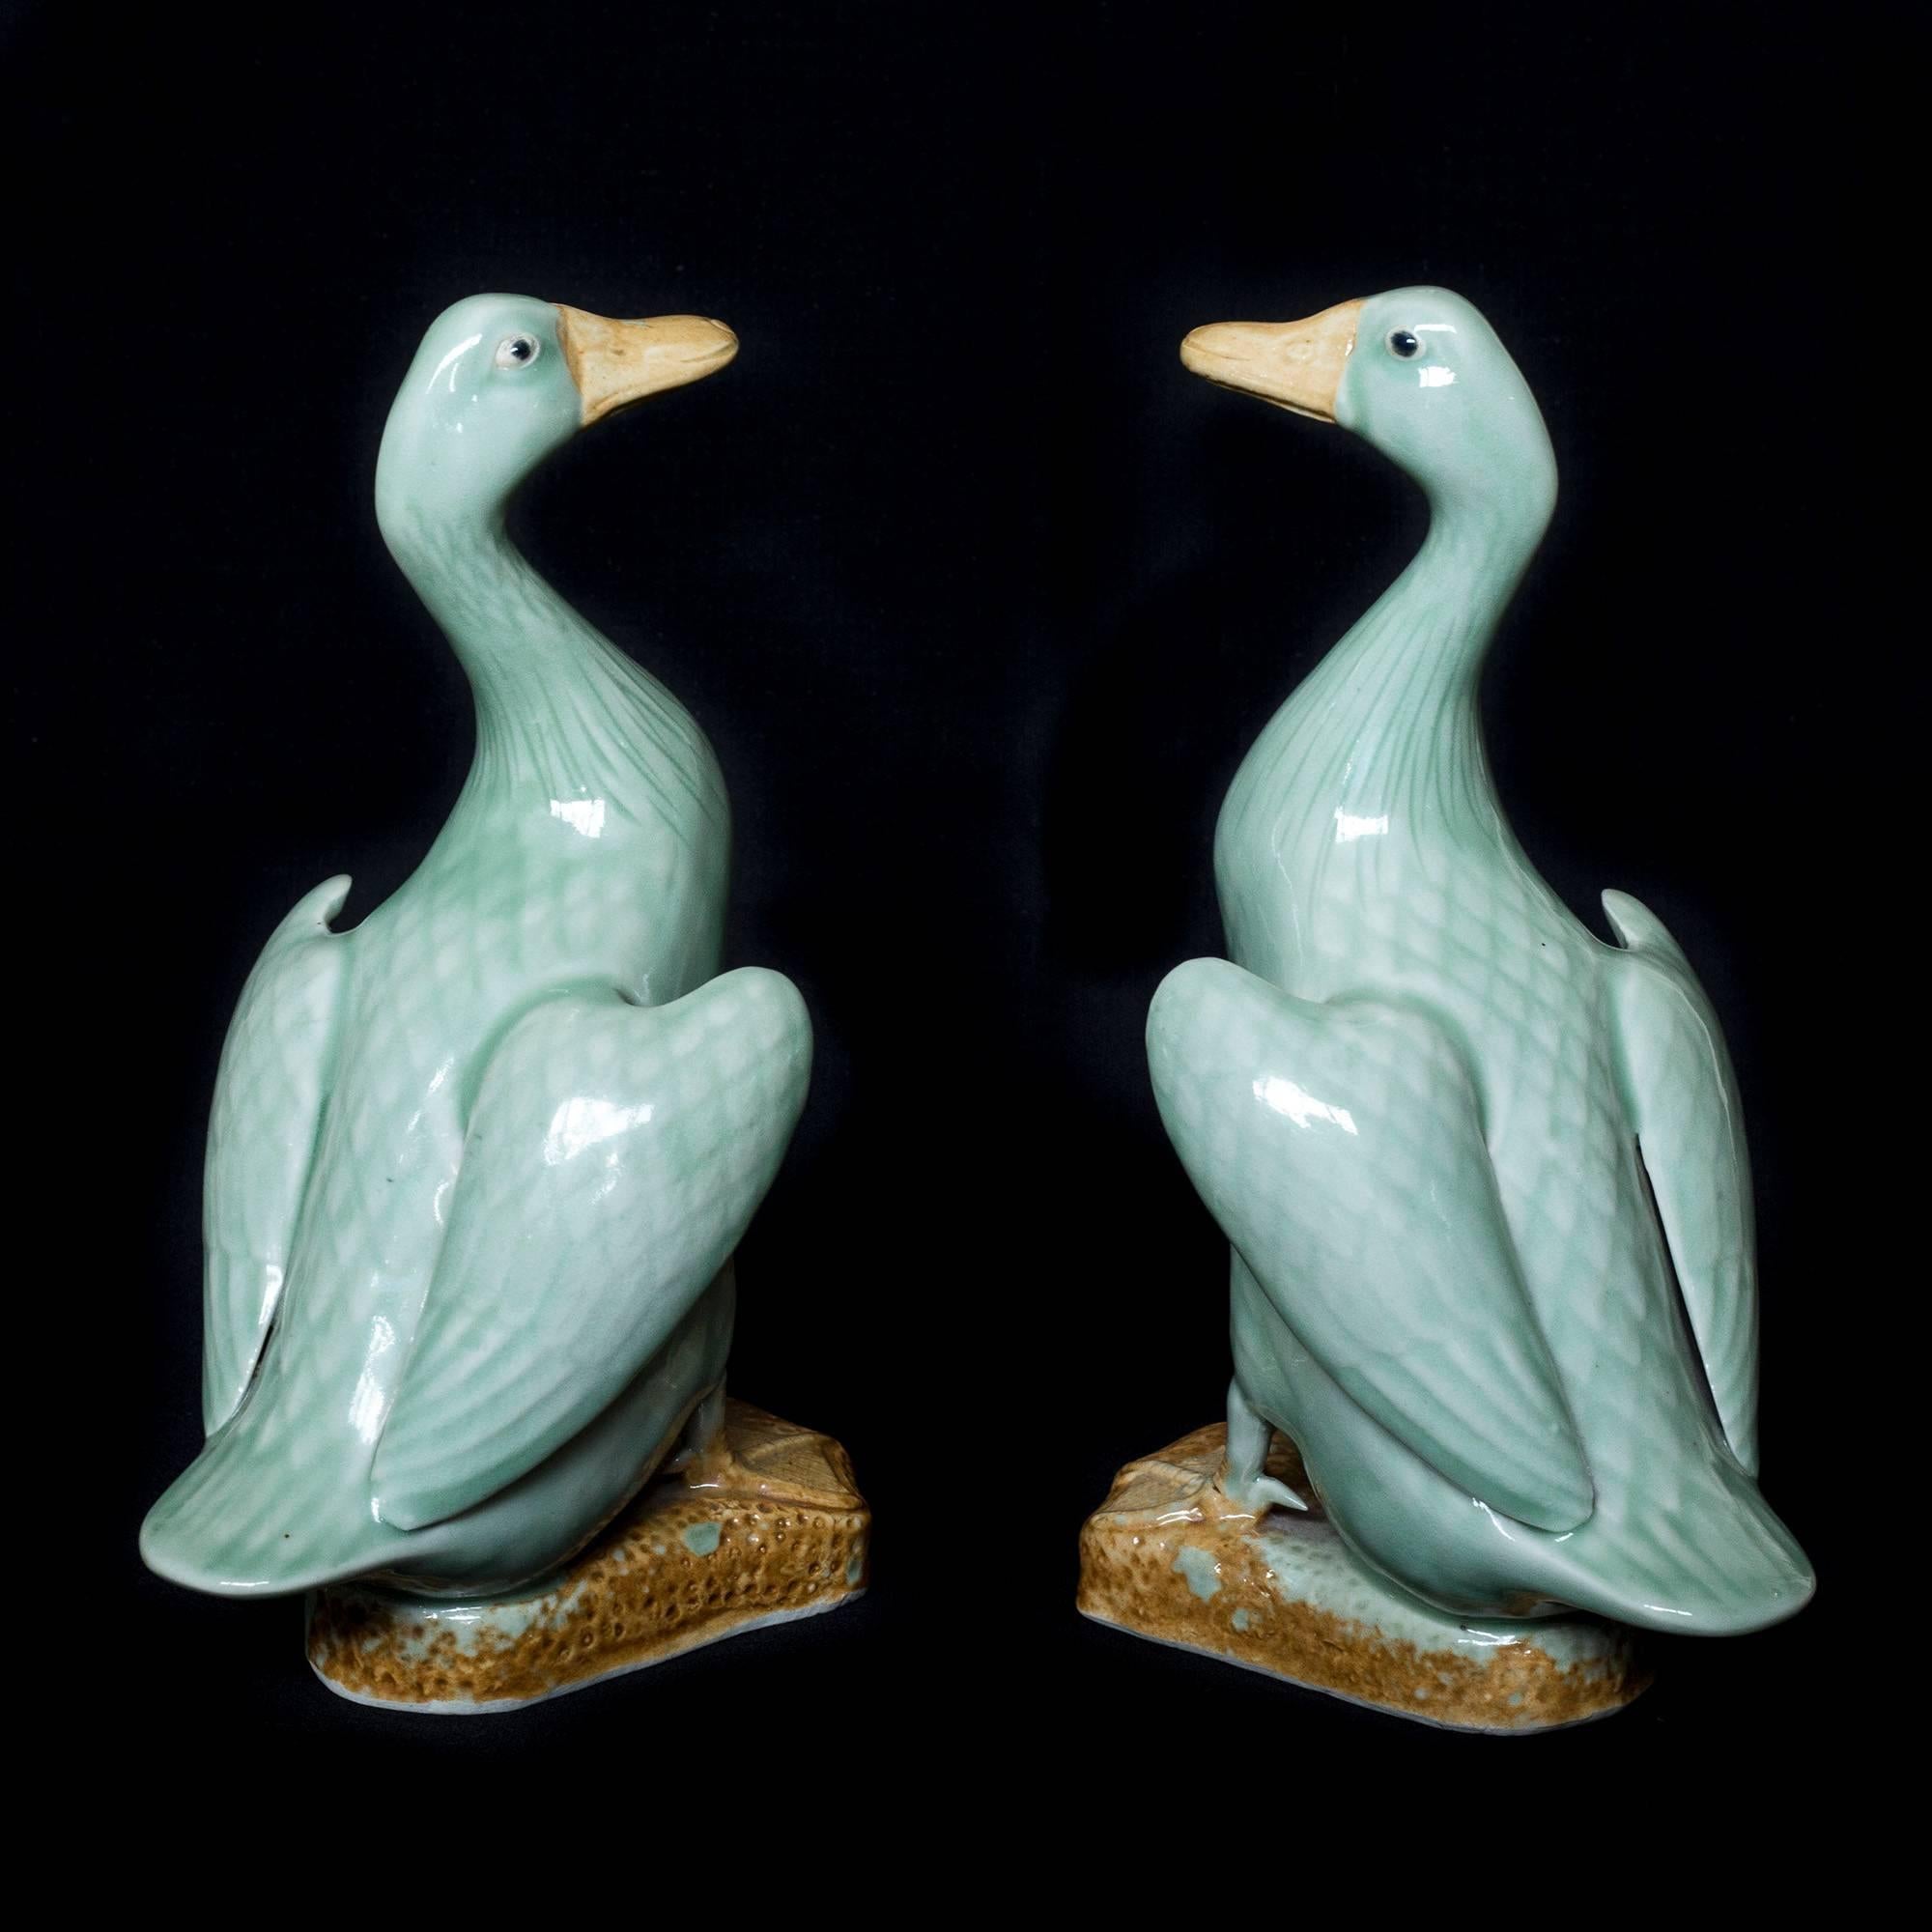 An attractive pair of Chinese-export celadon-glazed porcelain ducks,

China, 20th century.

Height: 9 in / 23 cm.

Near fine condition.

For related ducks see Christie's South Kensington, 17 February 2016, Lot 17.